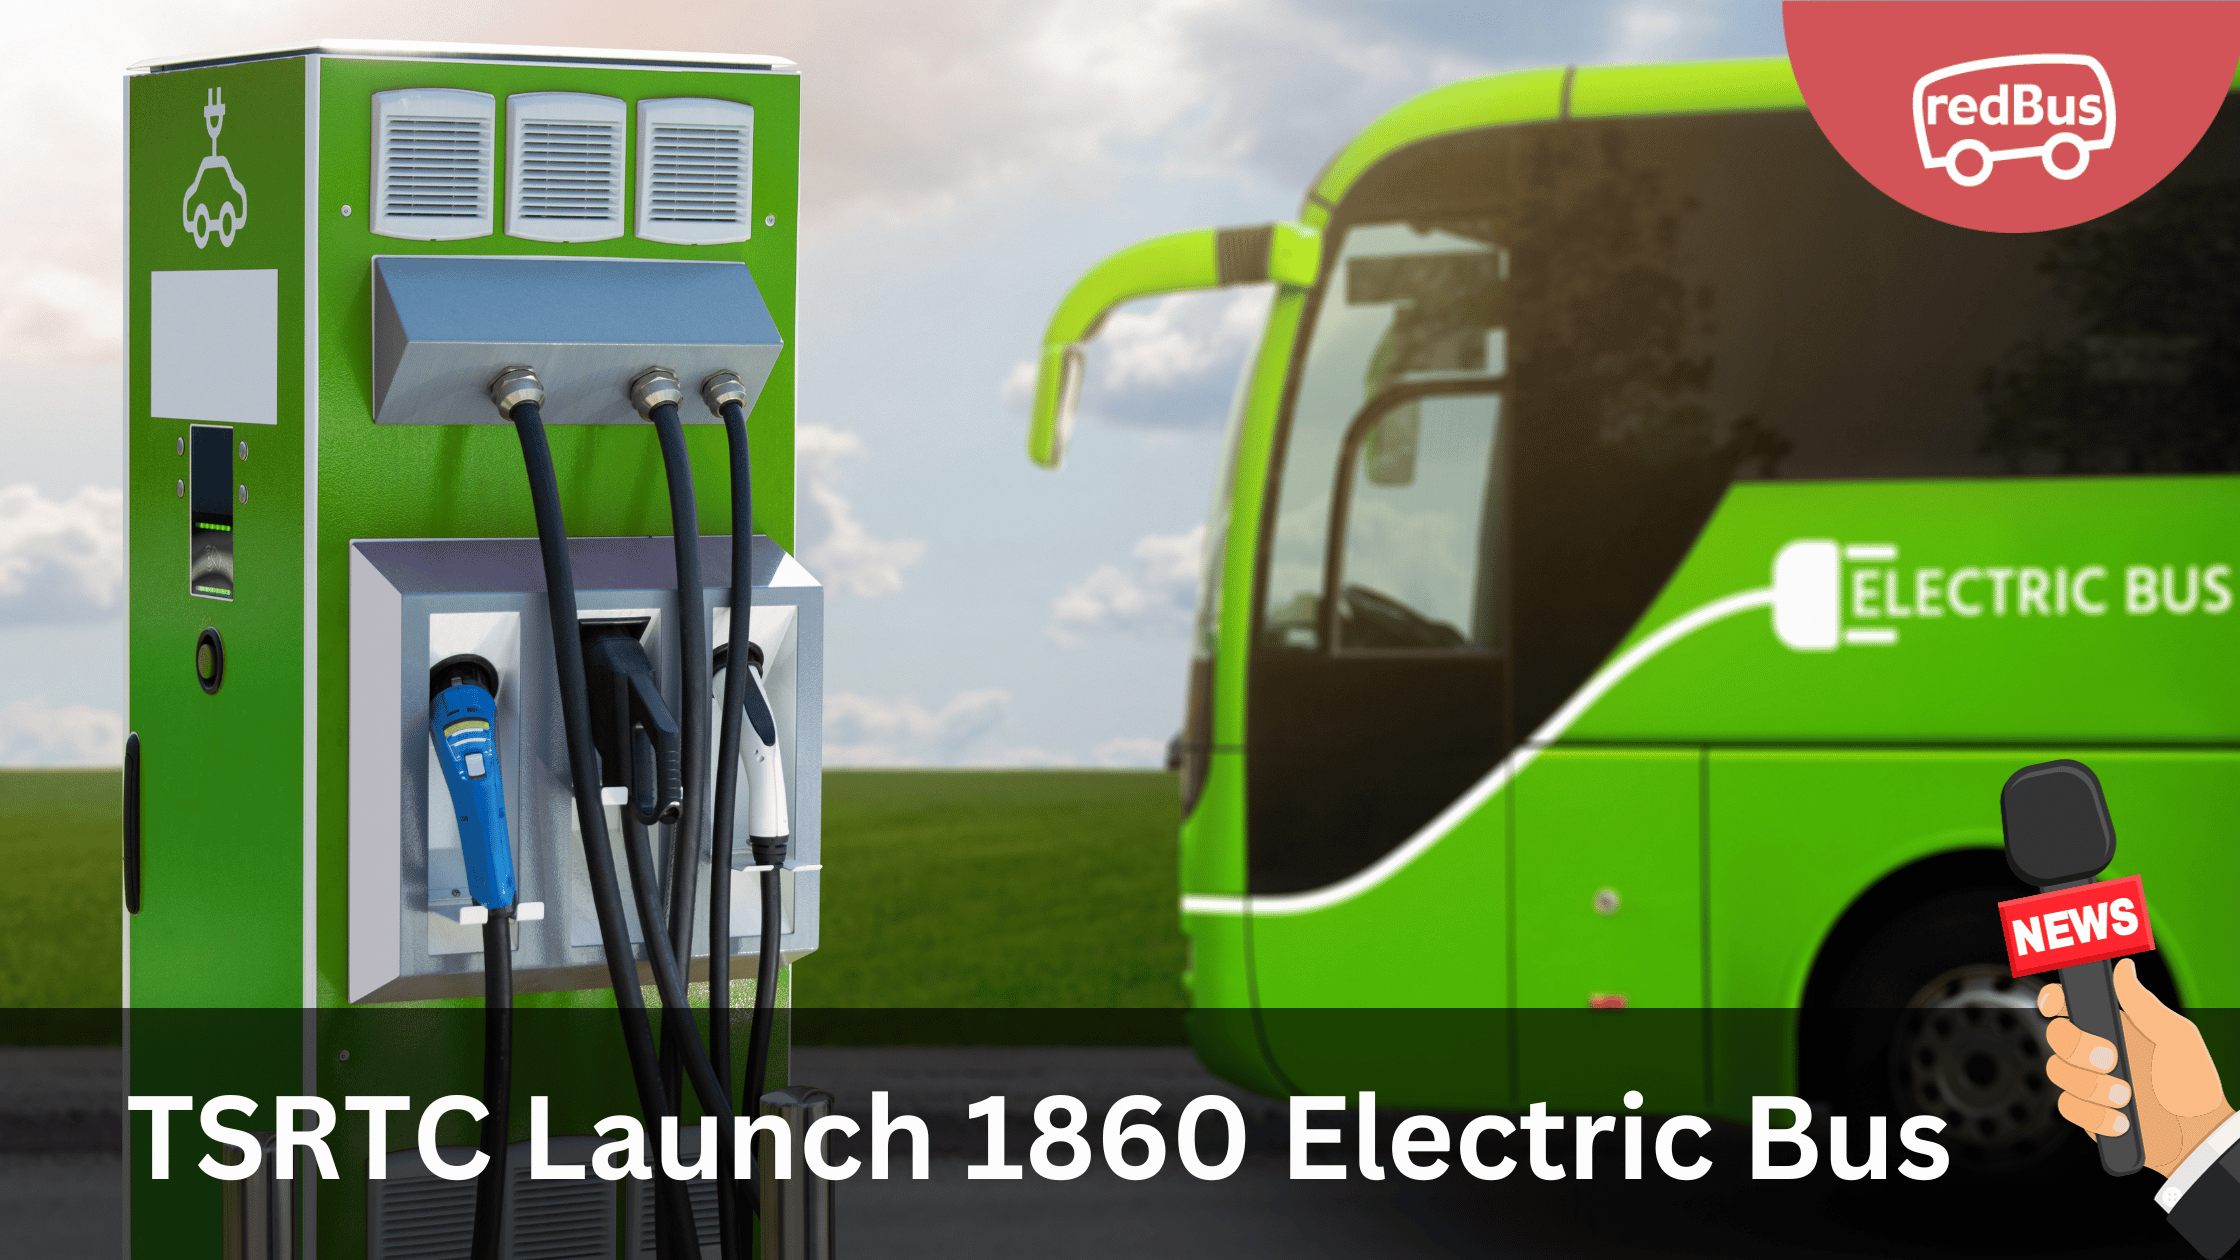 TSRTC Plans To Launch the 1,860 Electric Buses - redBus Blog